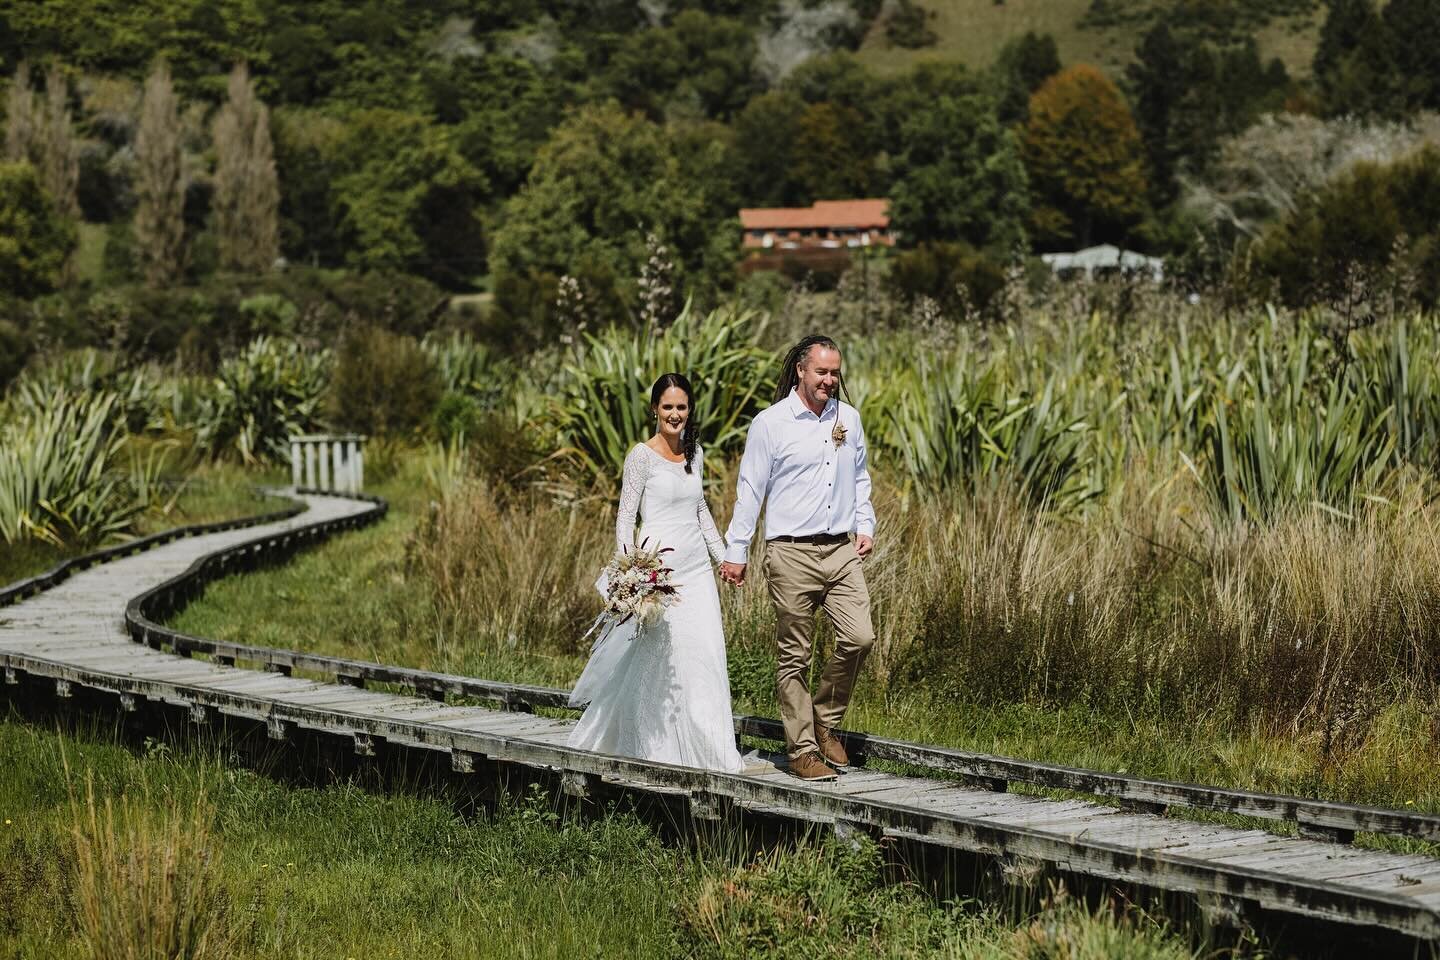 The Lake Ōkāreka boardwalk is just a stone's throw from Longfords, and just another beautiful spot on offer for snapping dreamy lakeside photos. 

I spy our homestead and marquee in the background of Courtney + Aaron's beautiful photos, captured by t